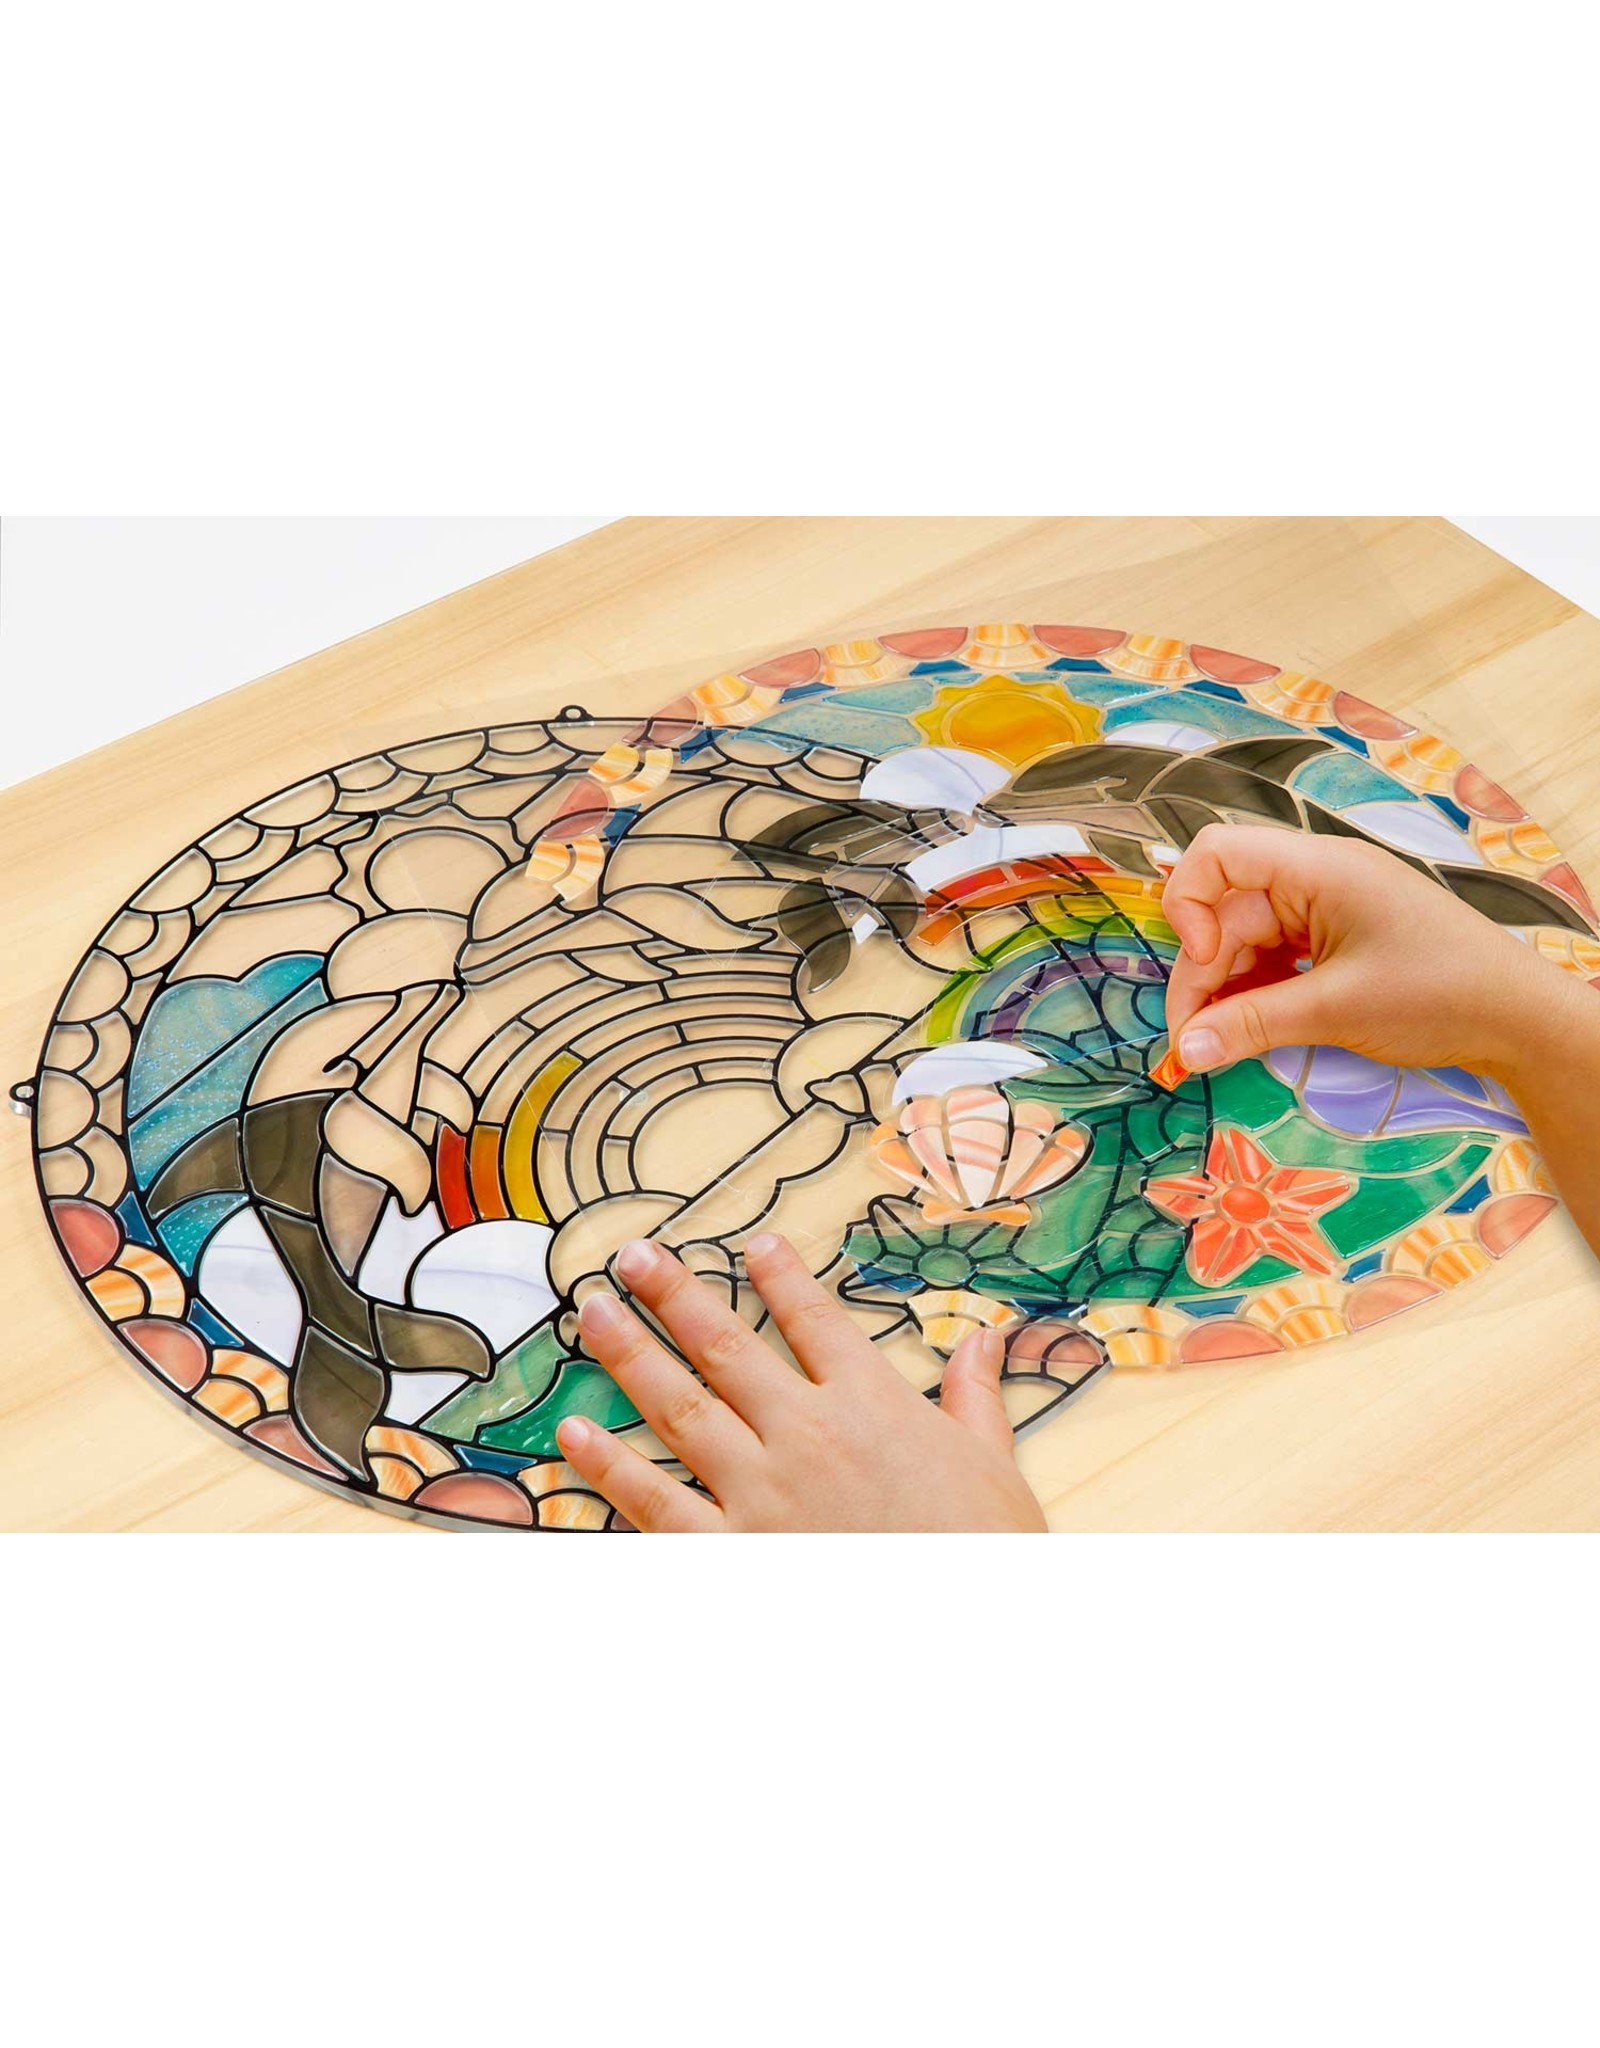 MELISSA & DOUG Stained Glass - Dolphins